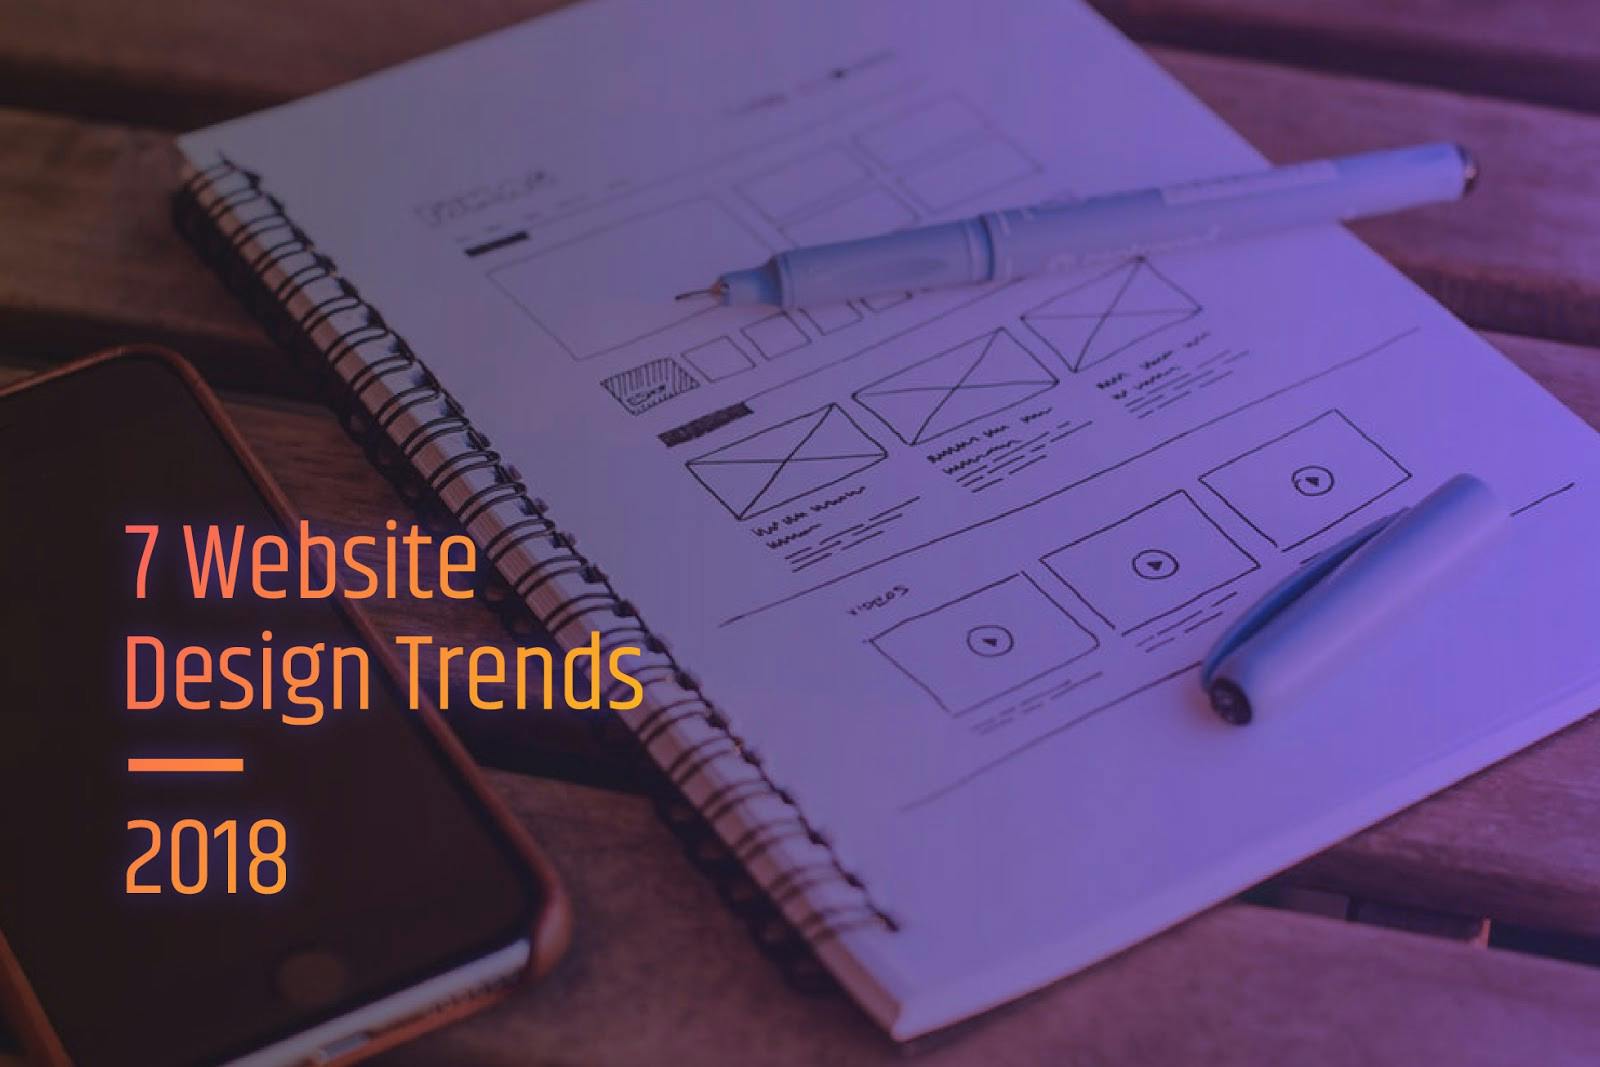 featured image - 7 Website Design Trends for 2018